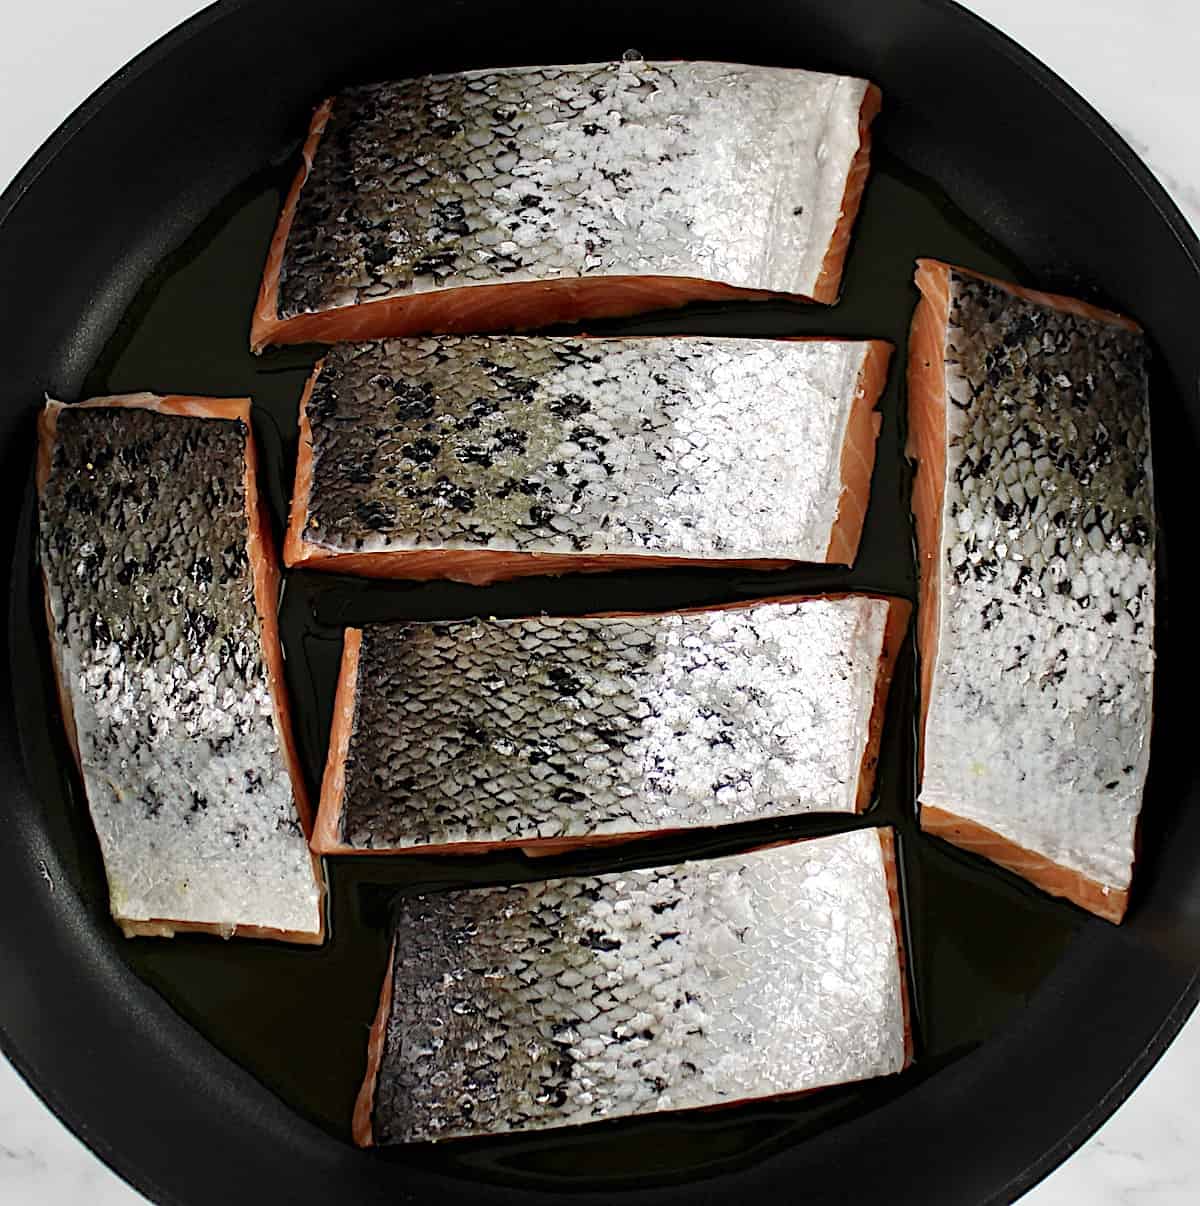 6 pieces of salmon cooking in skillet with skin side up